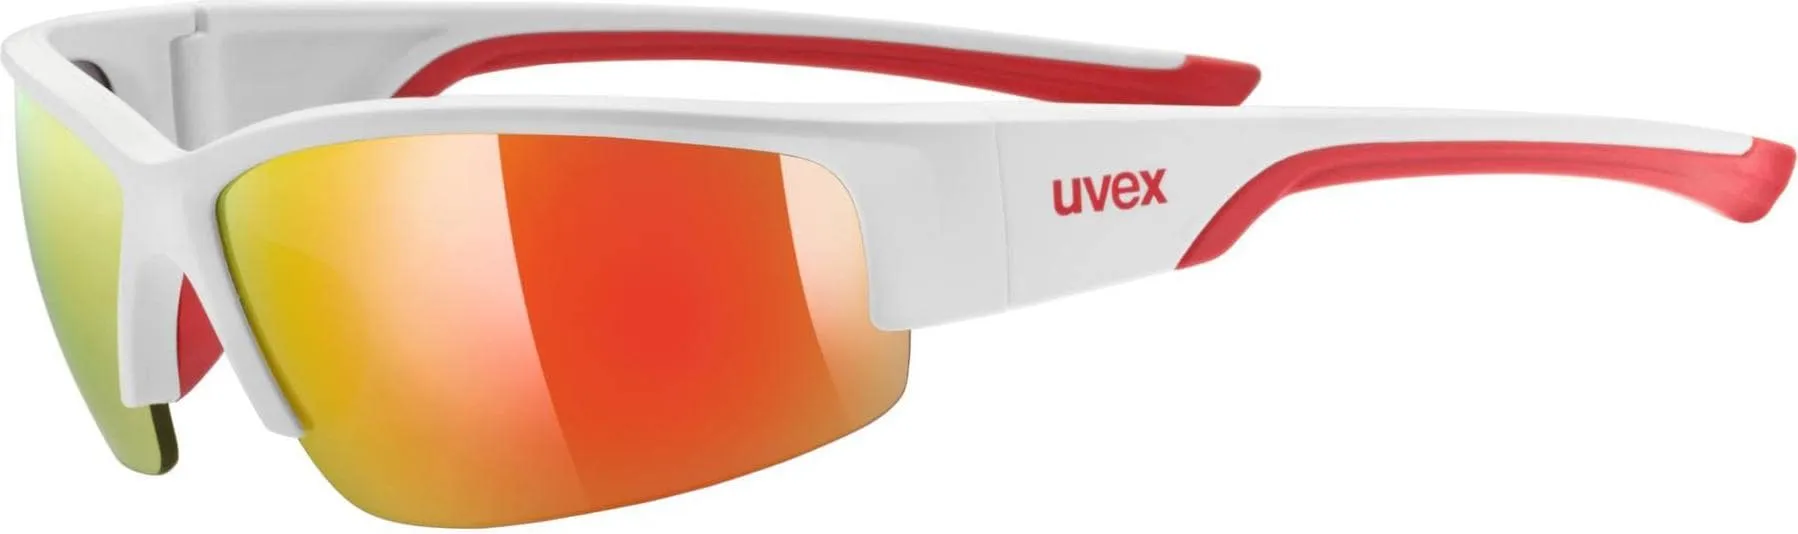 Uvex Sports, Unisex, Sportbrille, Sportstyle 215 (White Mat, Red, White Mat, Red), Weiss